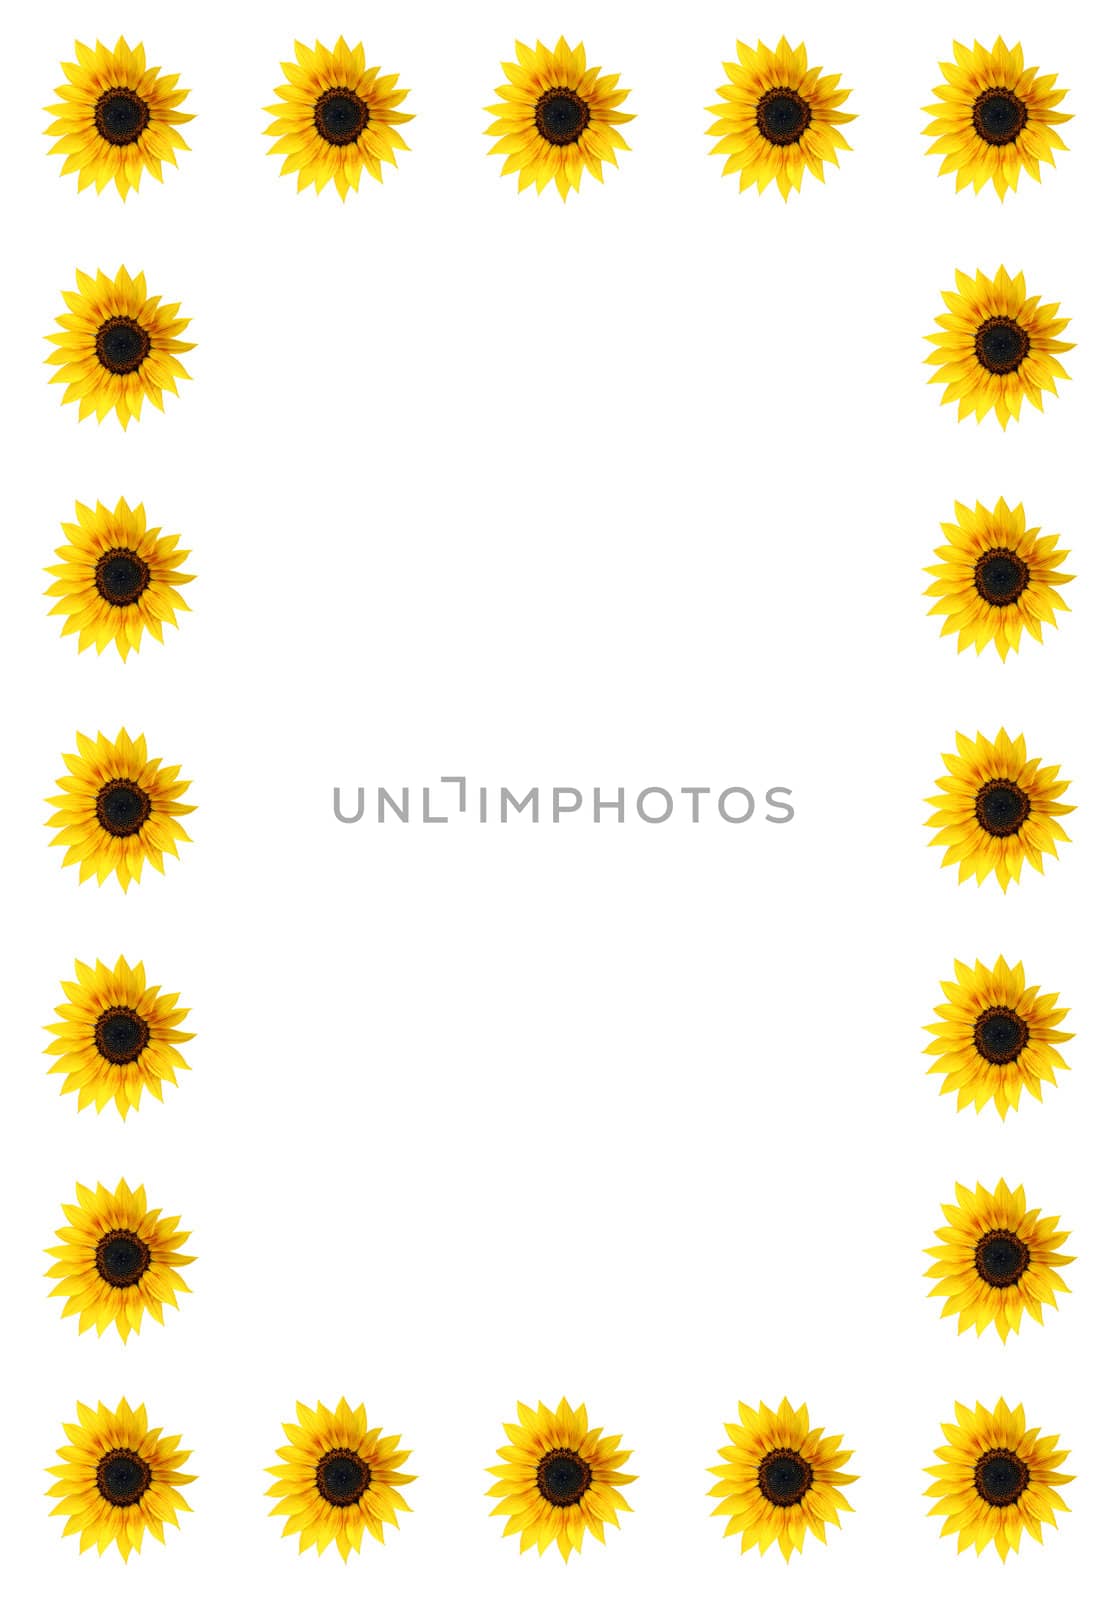 Border of sunflowers isolated on a white background